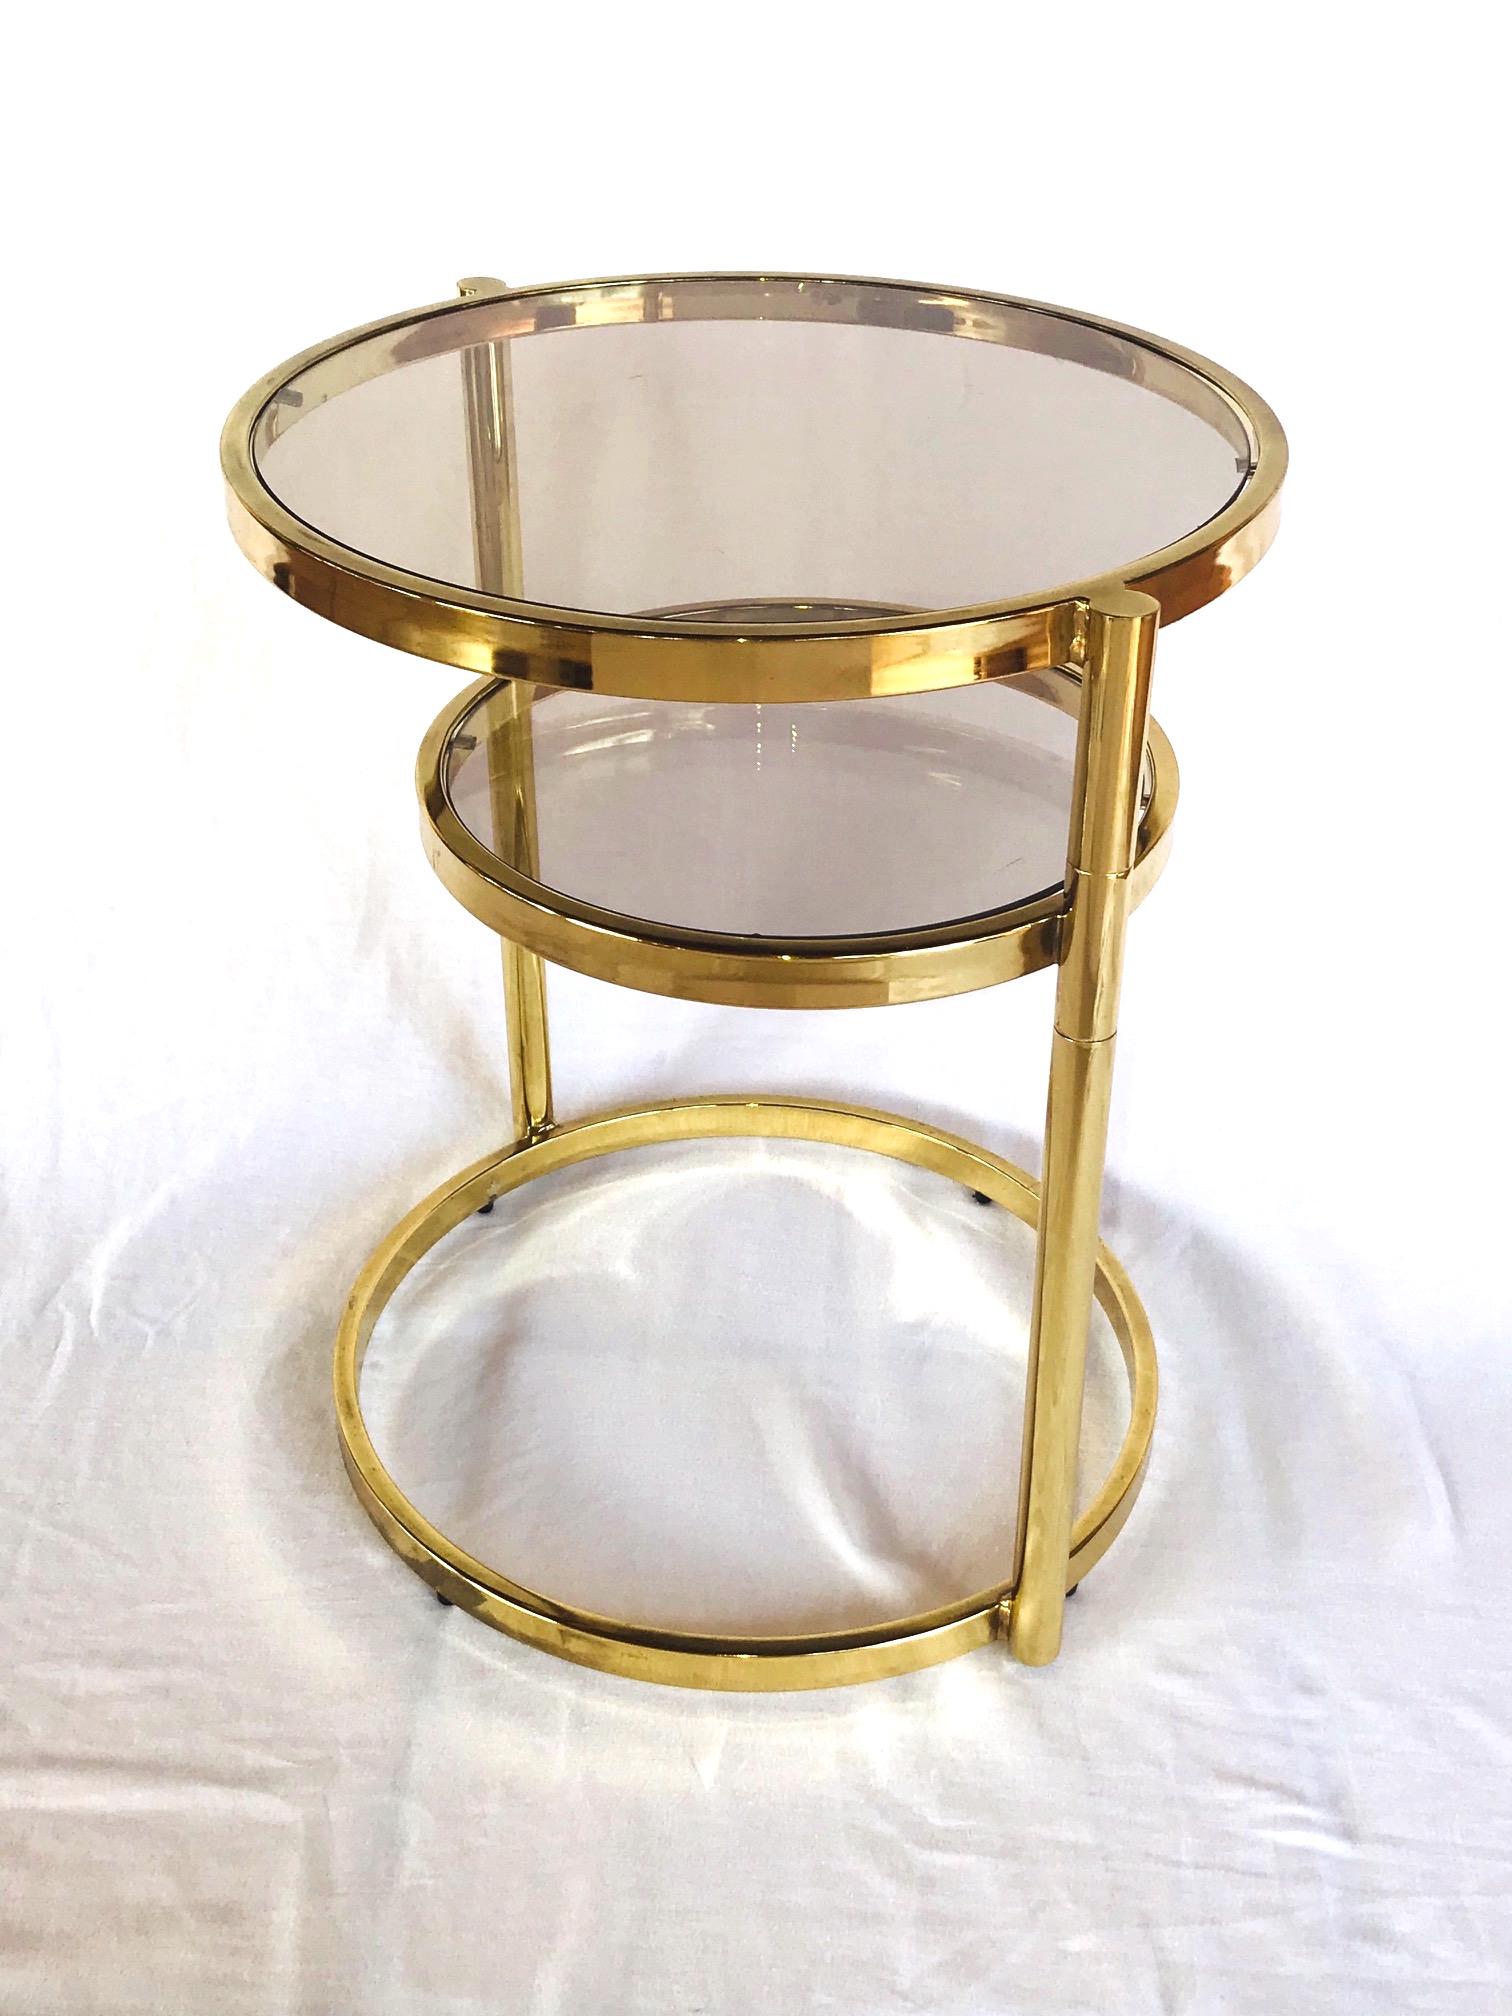 Plated Hollywood Regency Brass and Smoked Glass Swivel Side Table by DIA, 1970s